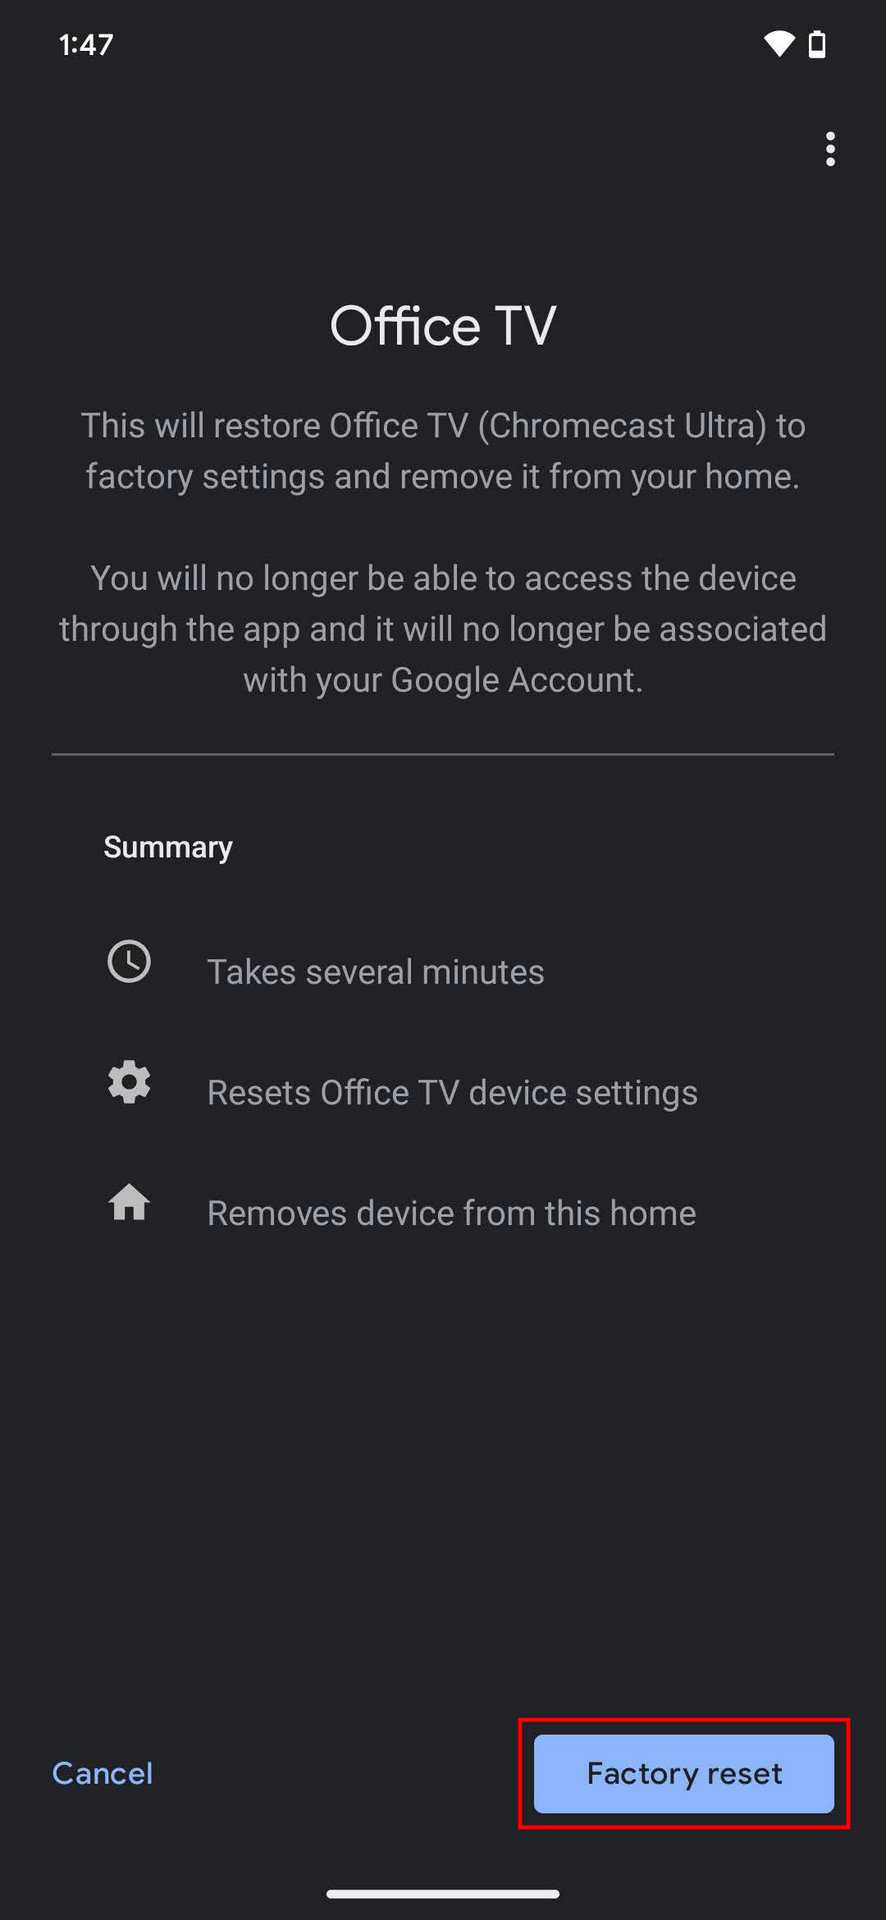 How to perform a factory reset on a Chromecast 5